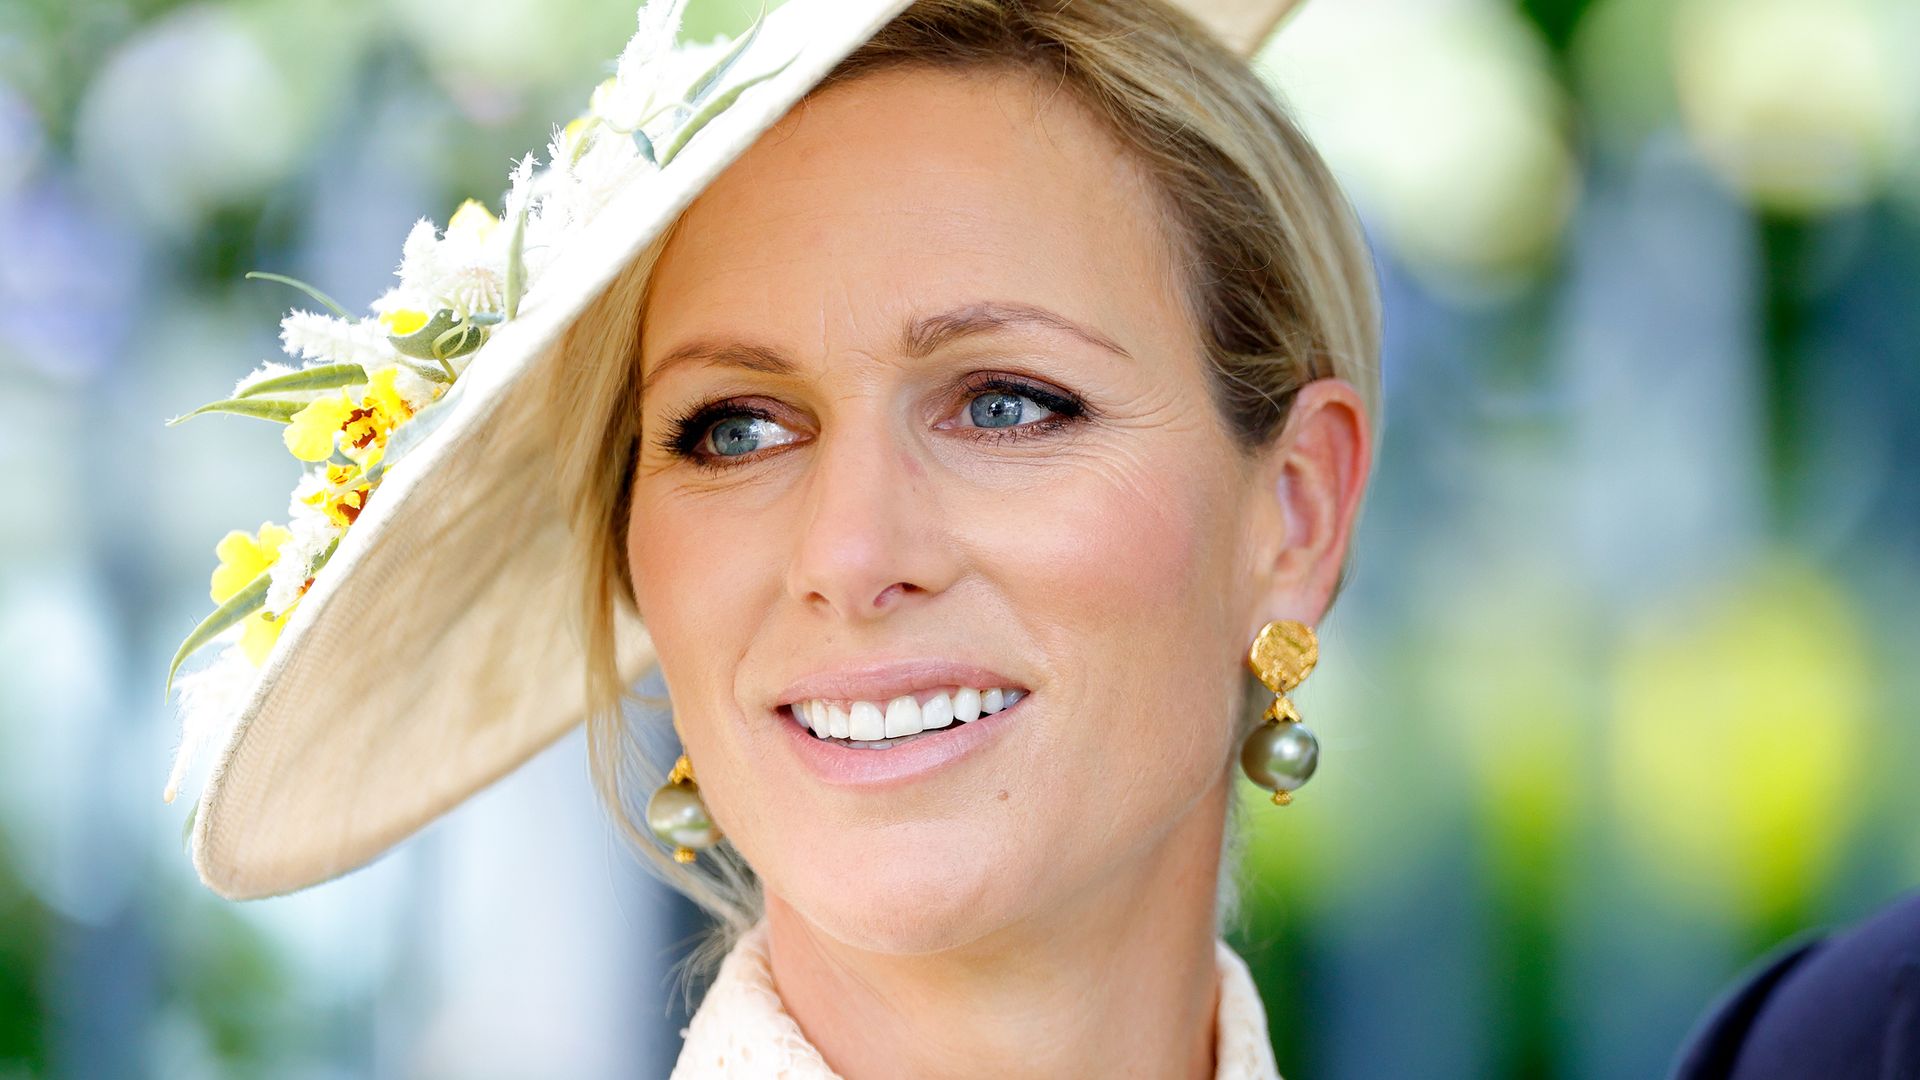 Zara Tindall attends day 3 'Ladies Day' of Royal Ascot 2023 at Ascot Racecourse on June 22, 2023 in Ascot, England